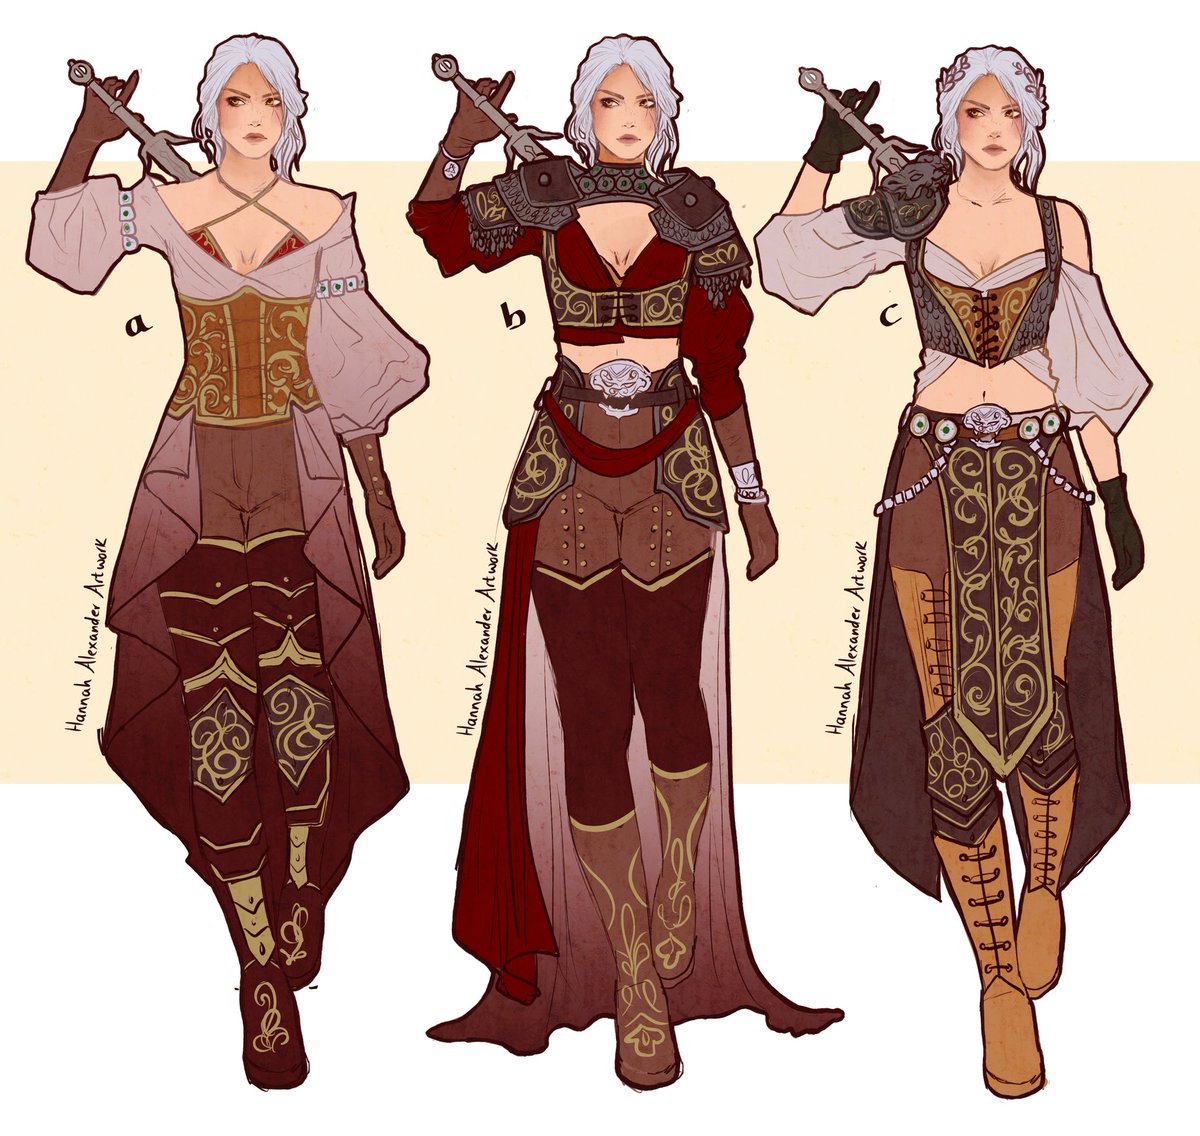 Ciri costume concepts from #TheWitcher Let me know which one you like best!